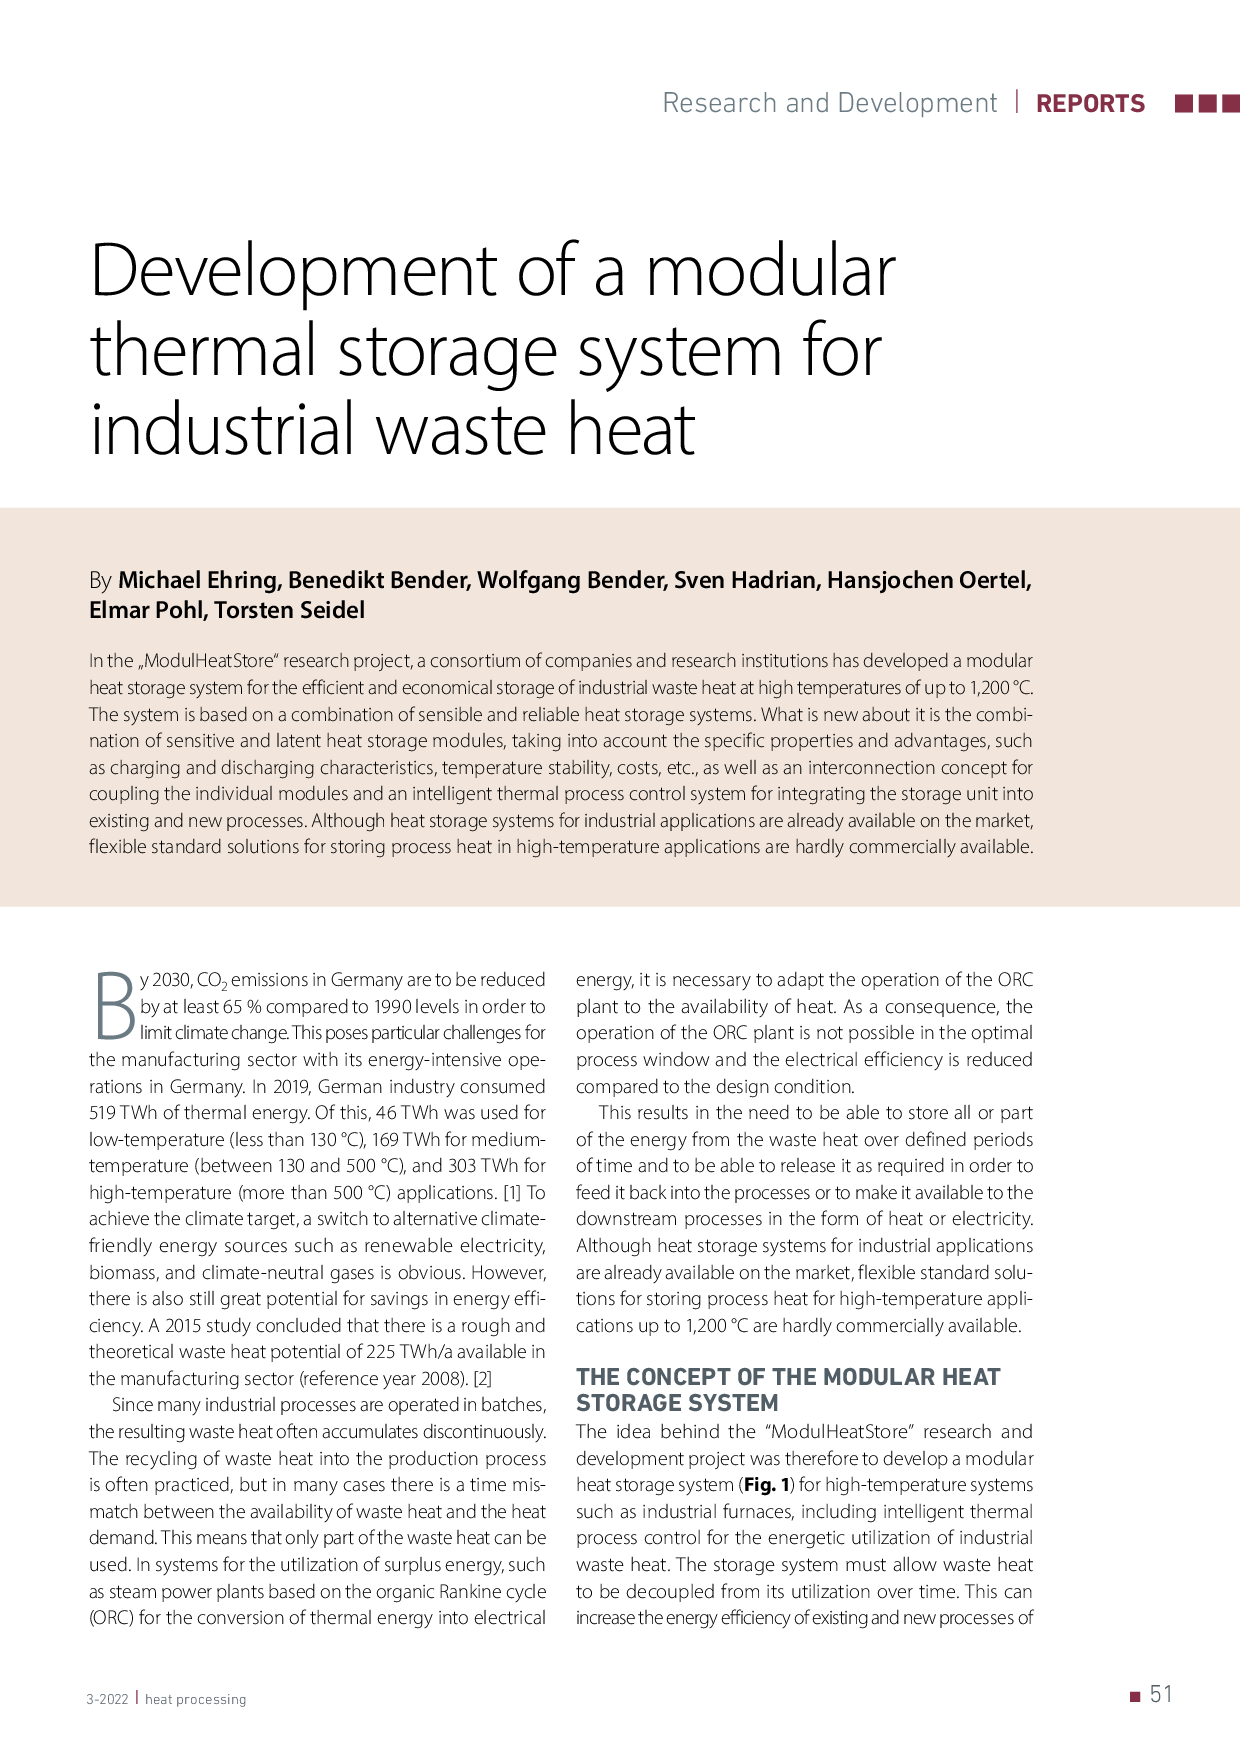 Development of a modular thermal storage system for industrial waste heat